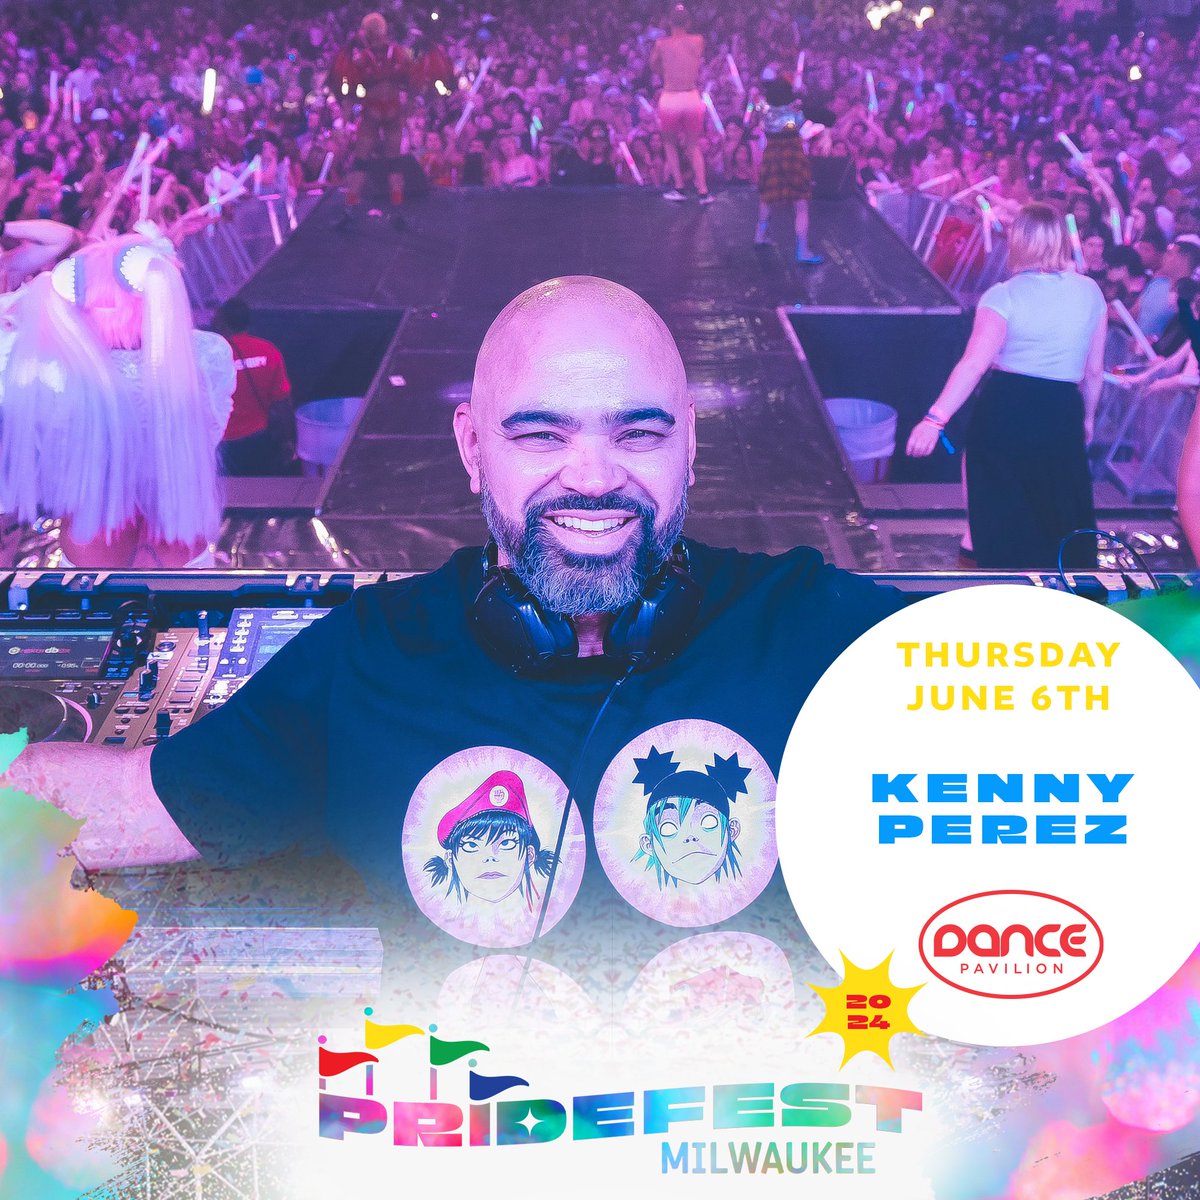 The man, the myth, the 🔥LEGEND🔥 Kenny Perez is the man behind the magic on Thursday, June 6th as our official first night Dance Pavilion Headliner! You've seen him around town, you've heard him through the @radiomilwaukee airwaves, and nows your chance to see him LIVE!😎📀🎶💥